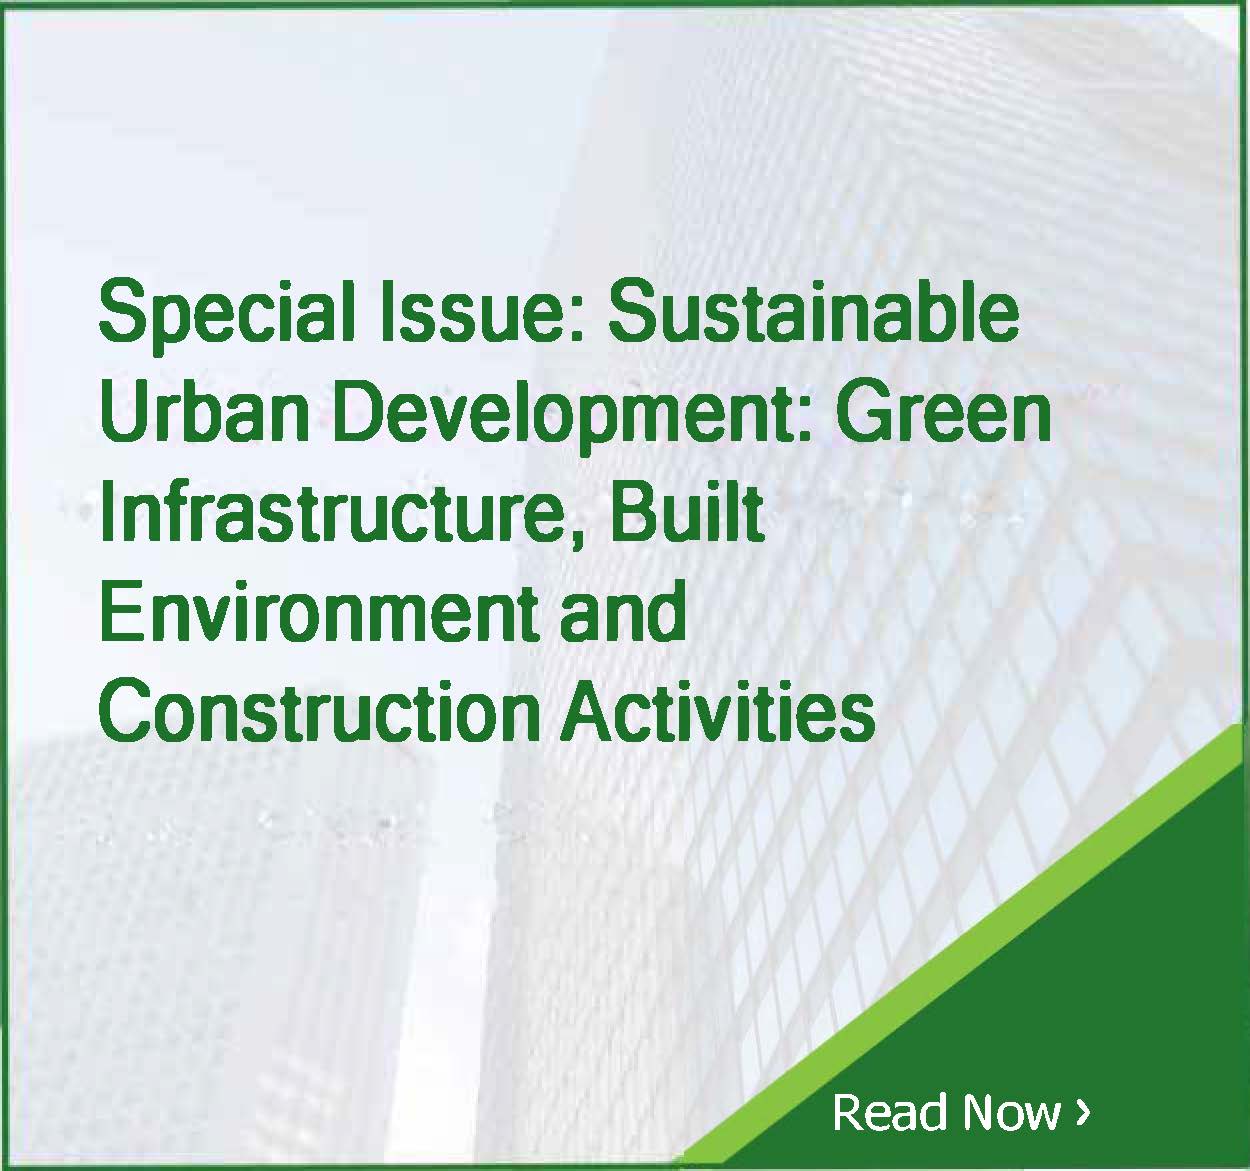 Special Issue: Sustainable Urban Development: Green Infrastructure, Built Environment and Construction Activities